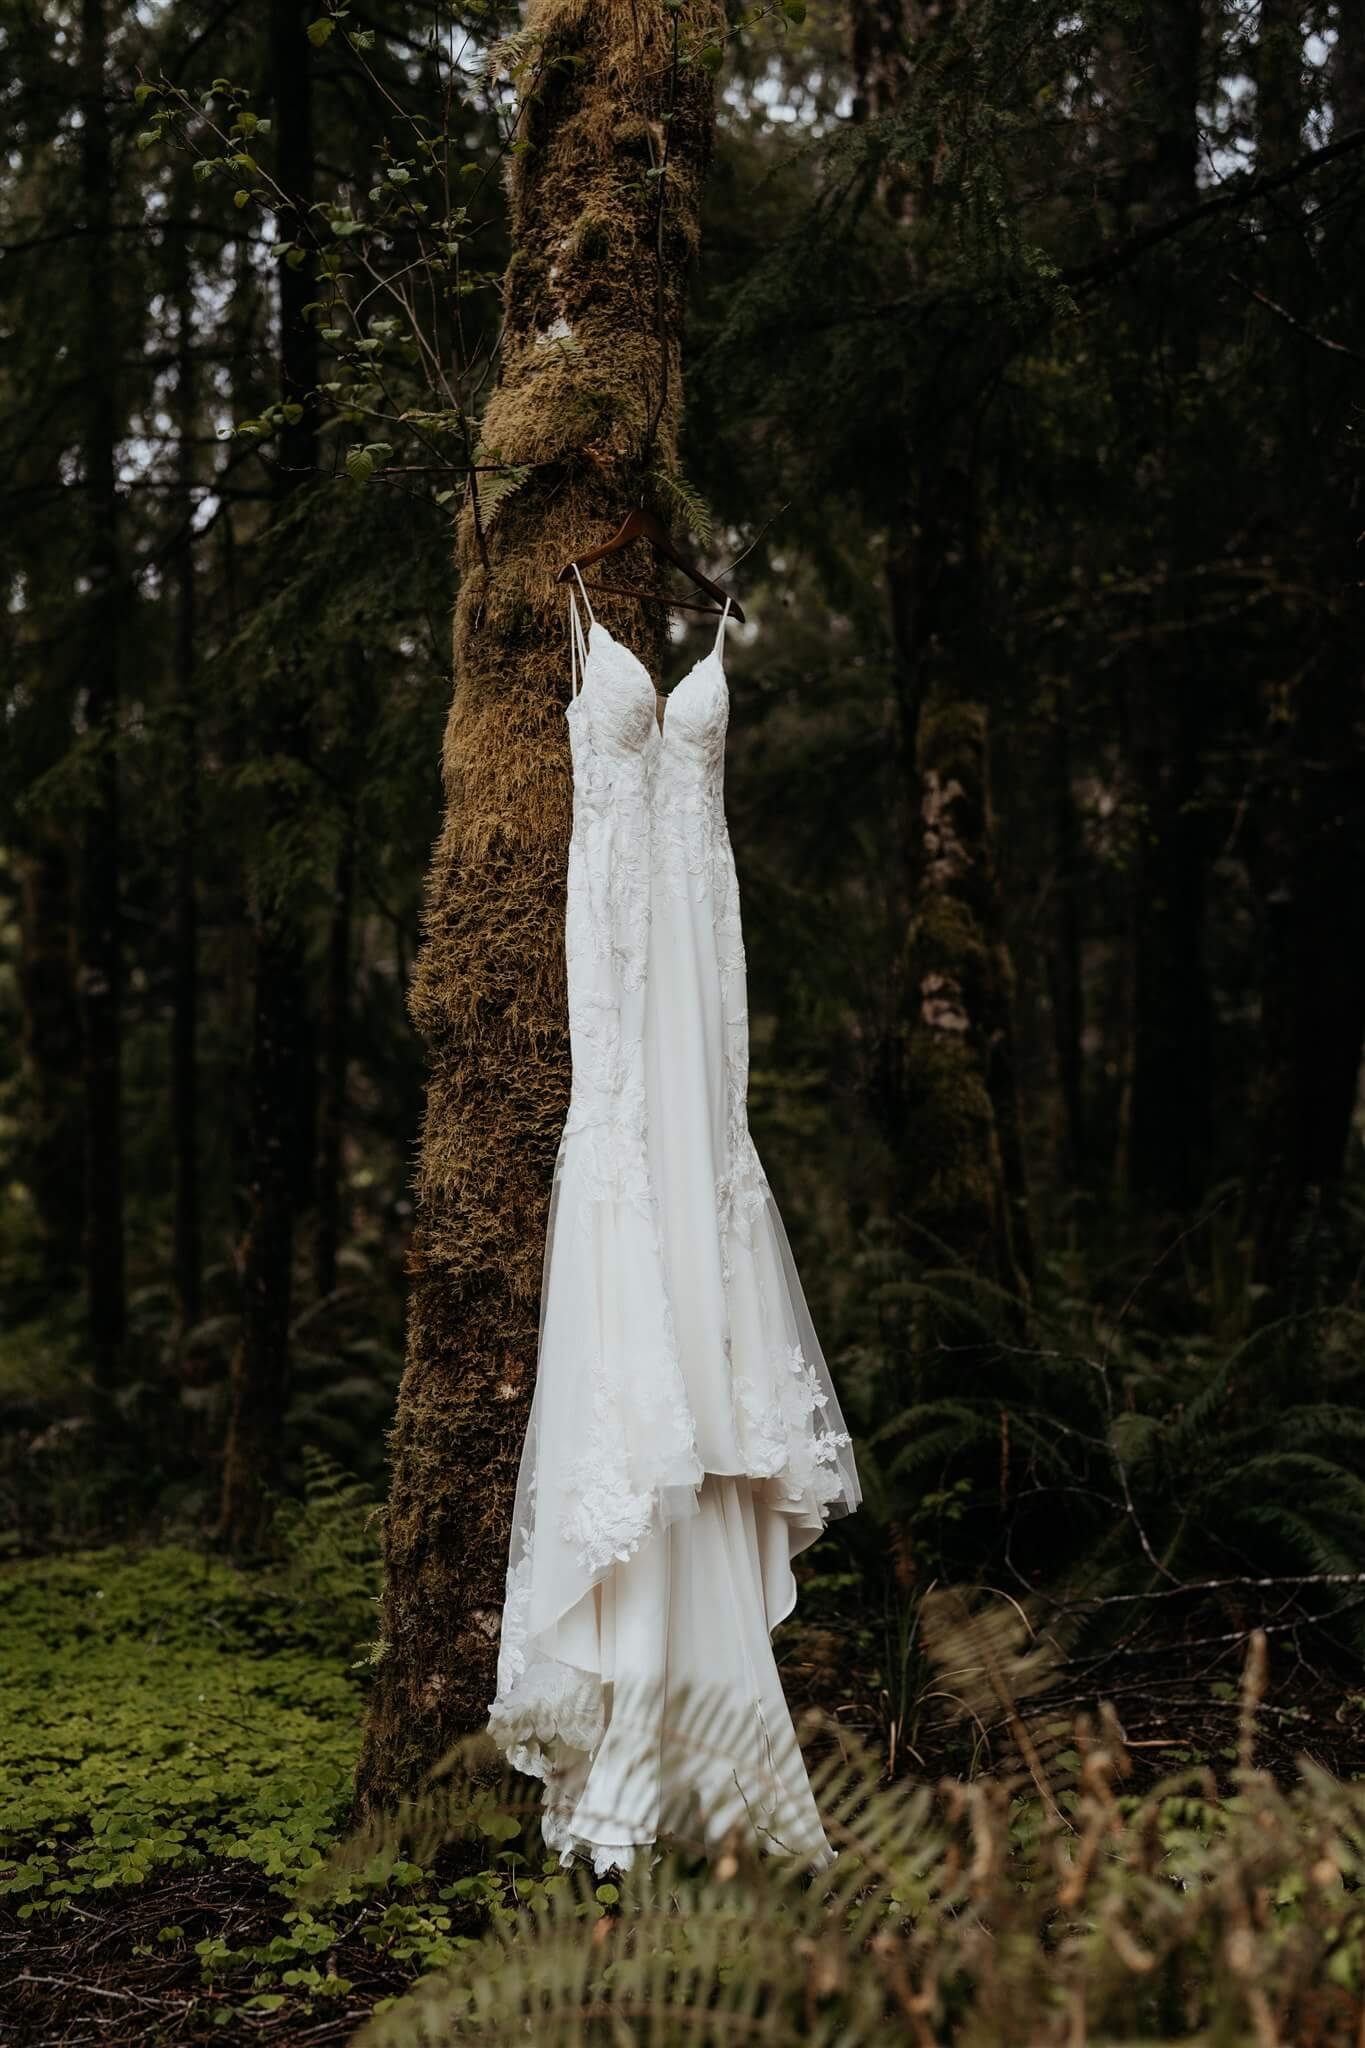 White wedding dress hanging from a tree in the Hoh Rainforest